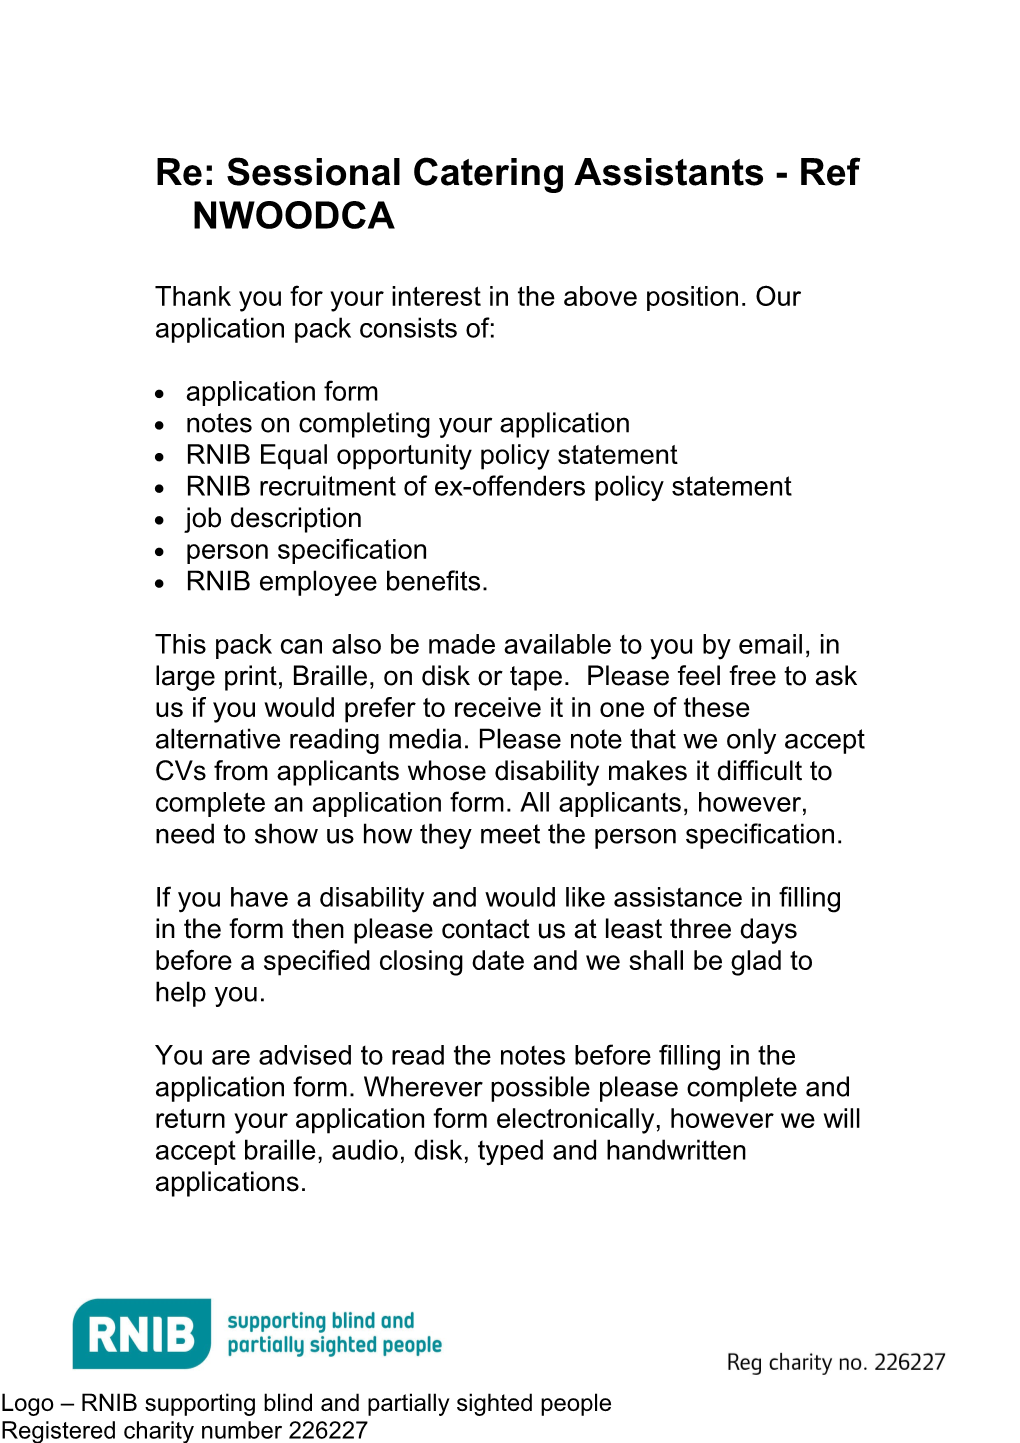 Sessional Catering Assistant (NWOOD) Information Pack